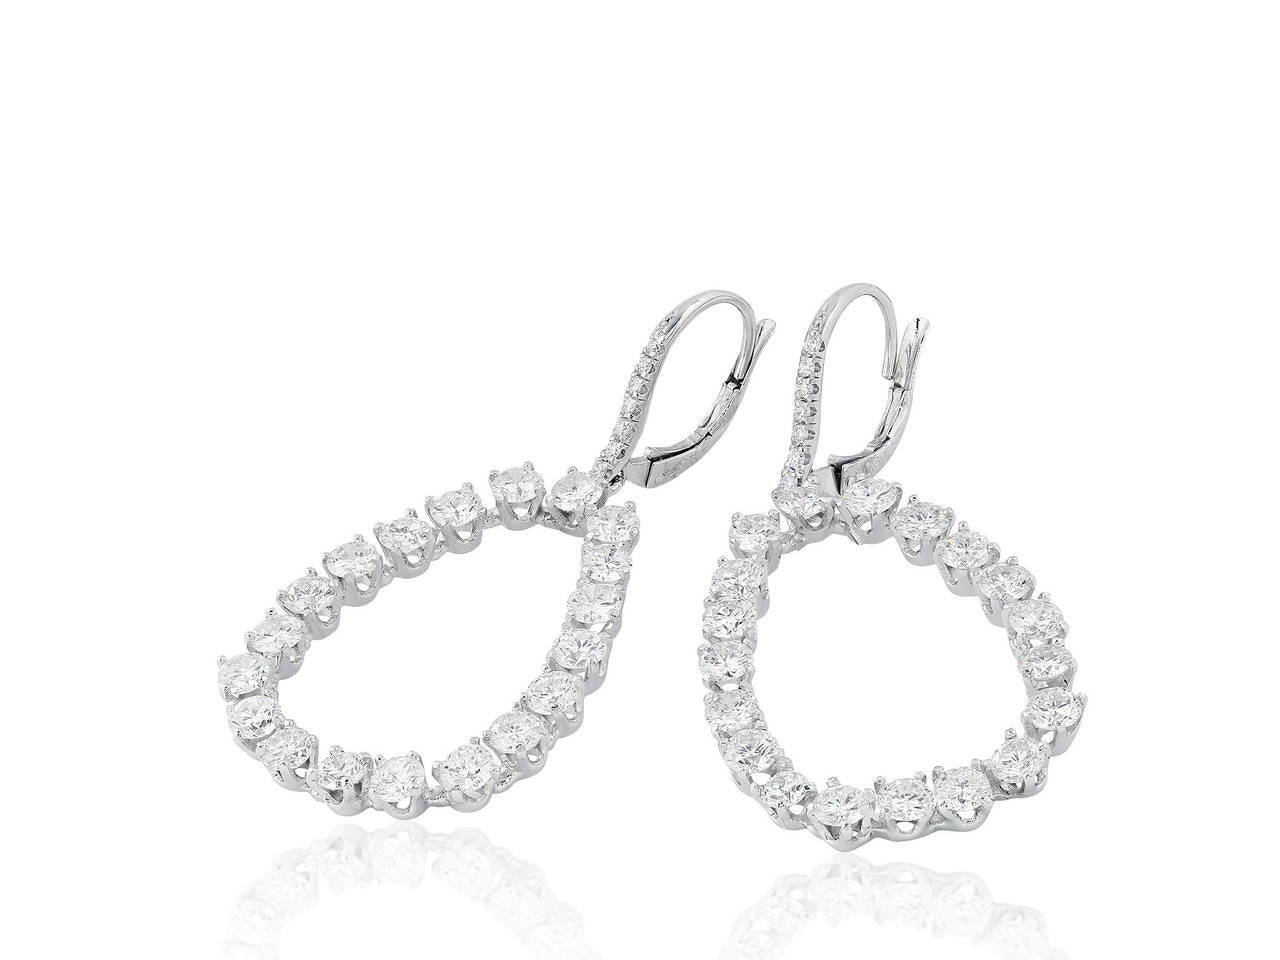 Platinum tear drop shape earrings set with 38 round brilliant cut diamonds having a total weight of 5.80 carats total weight and approximate color and clarity of E/VS2.